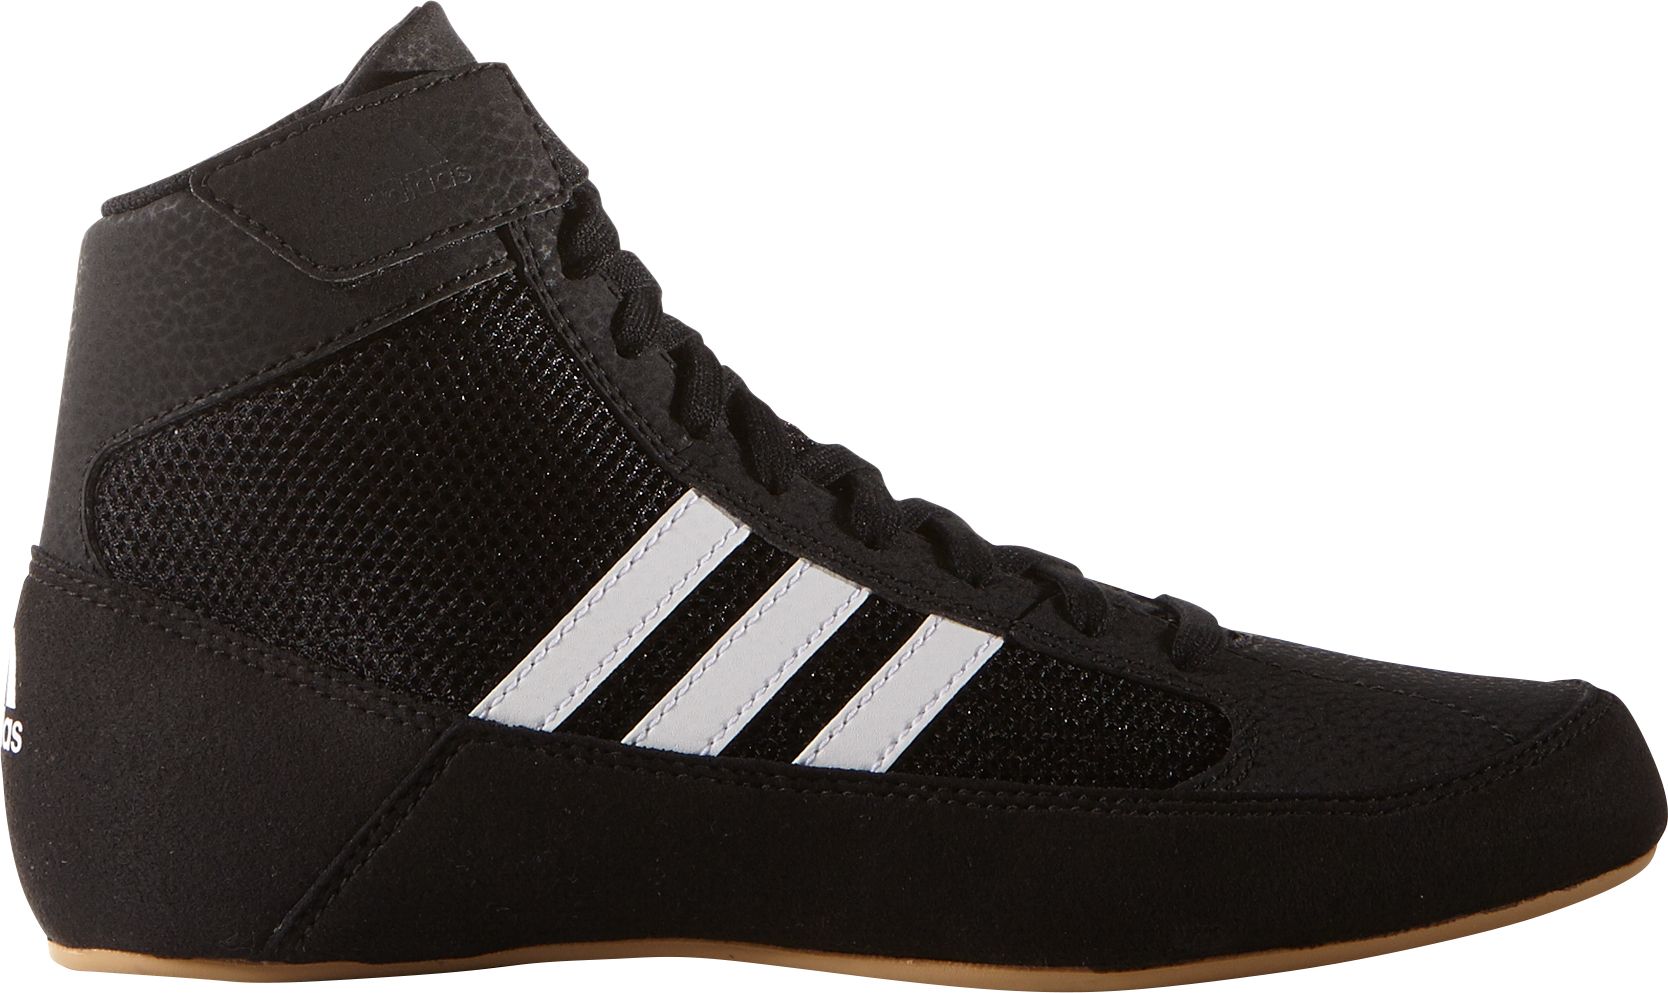 new adidas wrestling shoes 2018